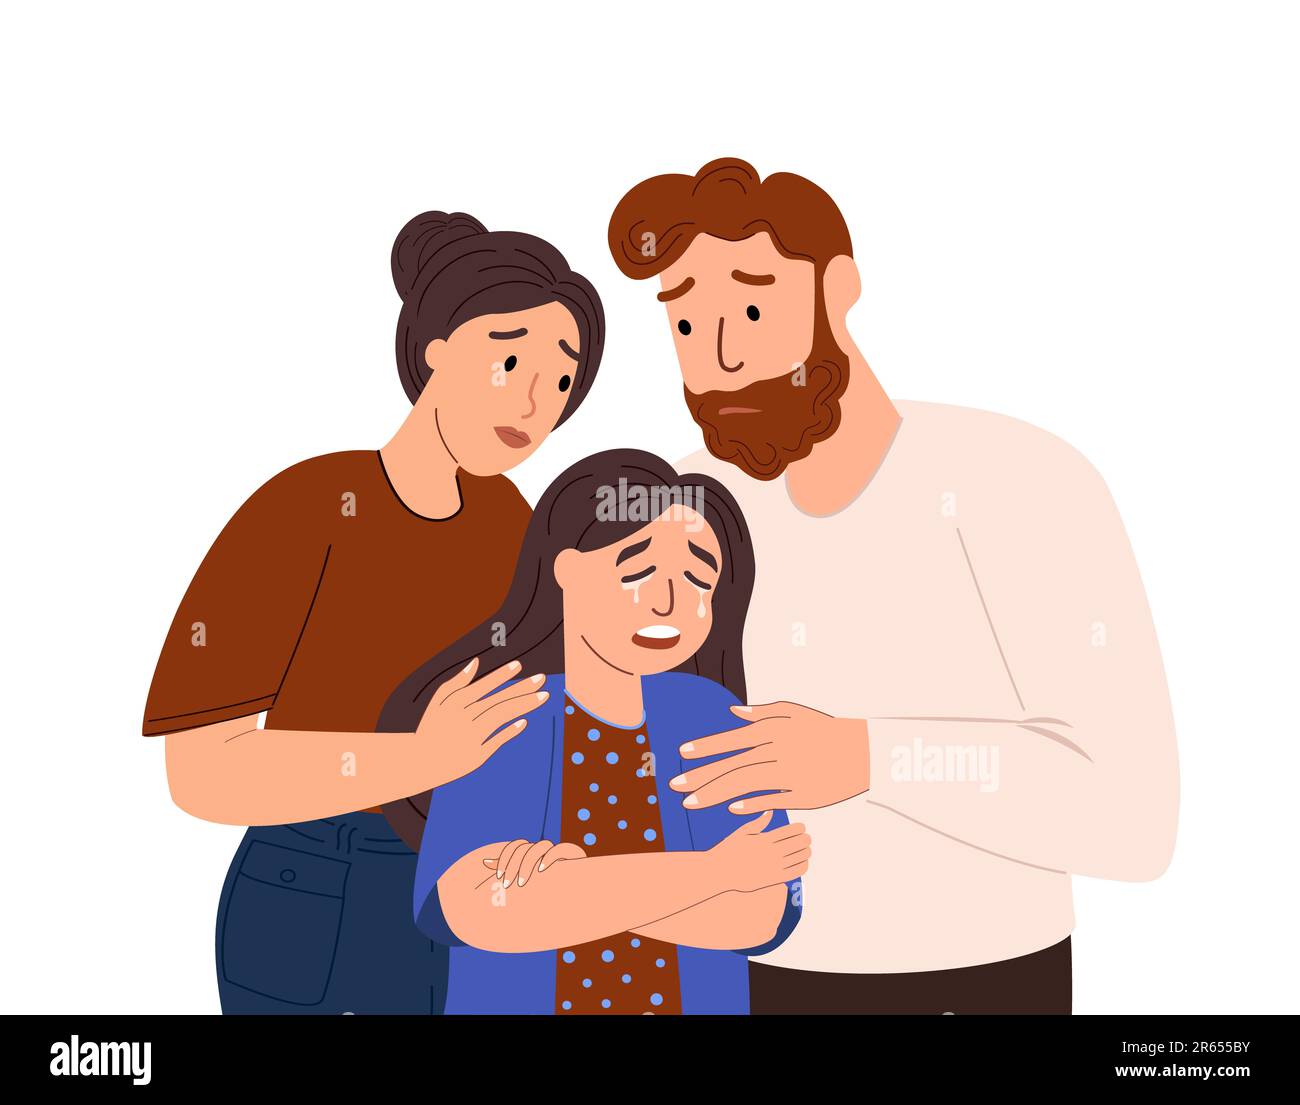 Family support, care concept. Mother, father comforting crying sad ...